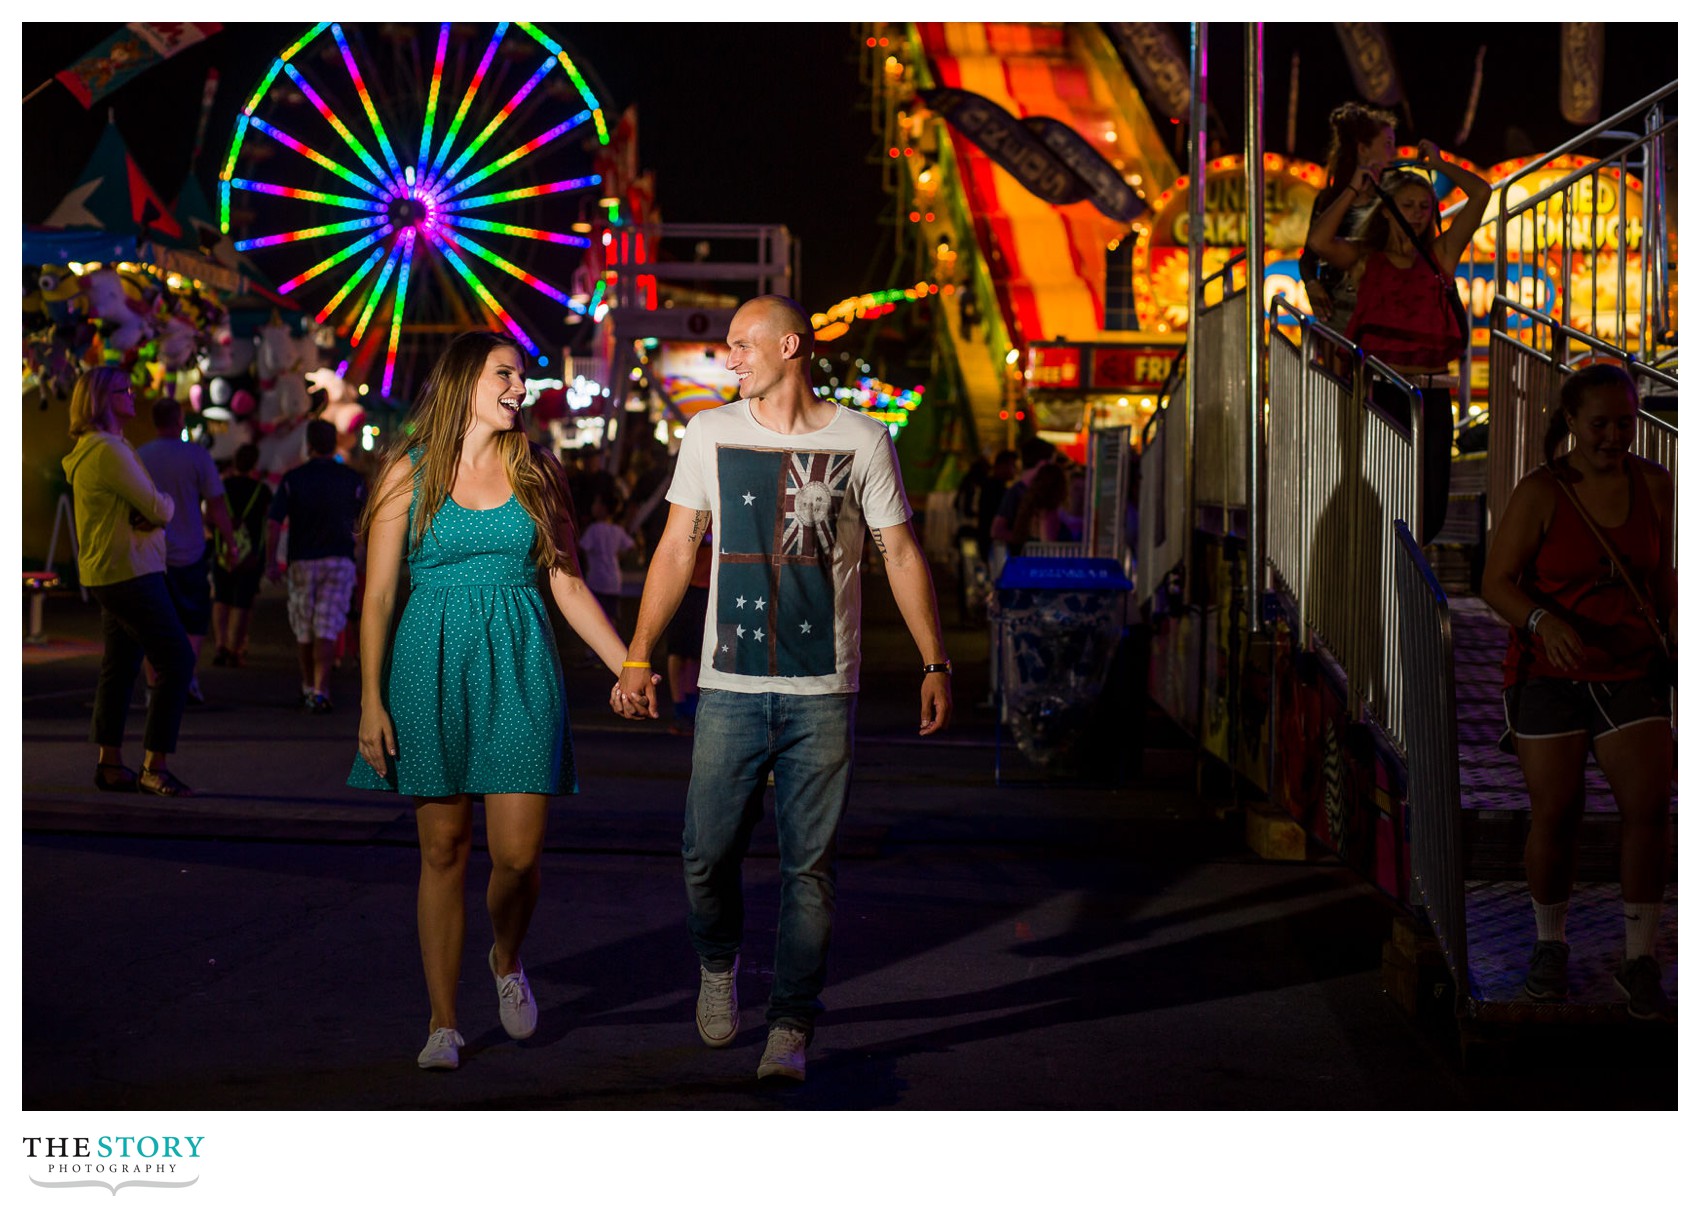 New York state fair midway engagement photography